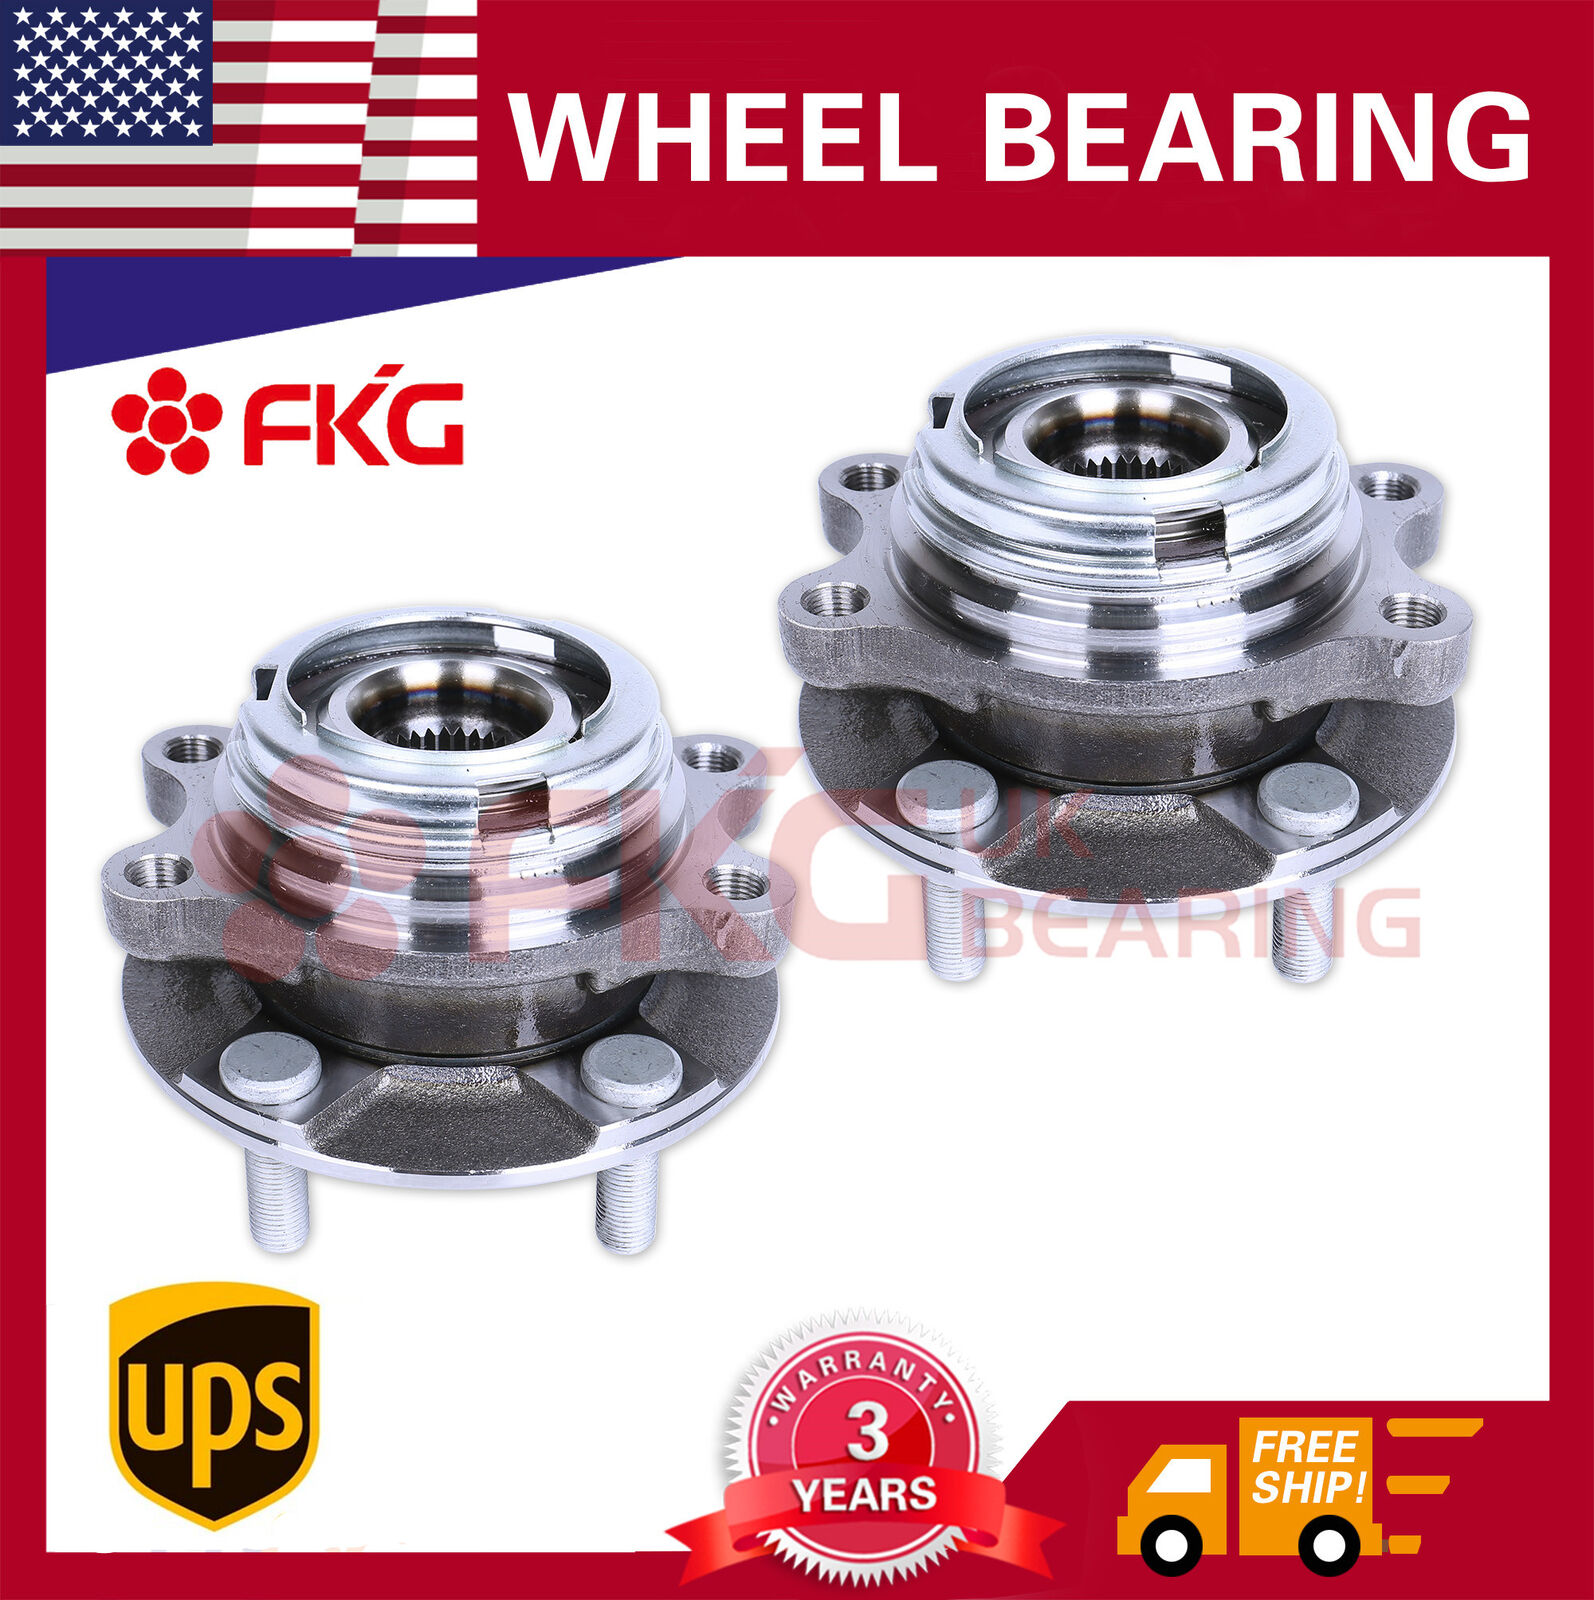 (2) 513296 Front Wheel Bearing & Hub Assembly fits Nissan Quest Maxima Murano